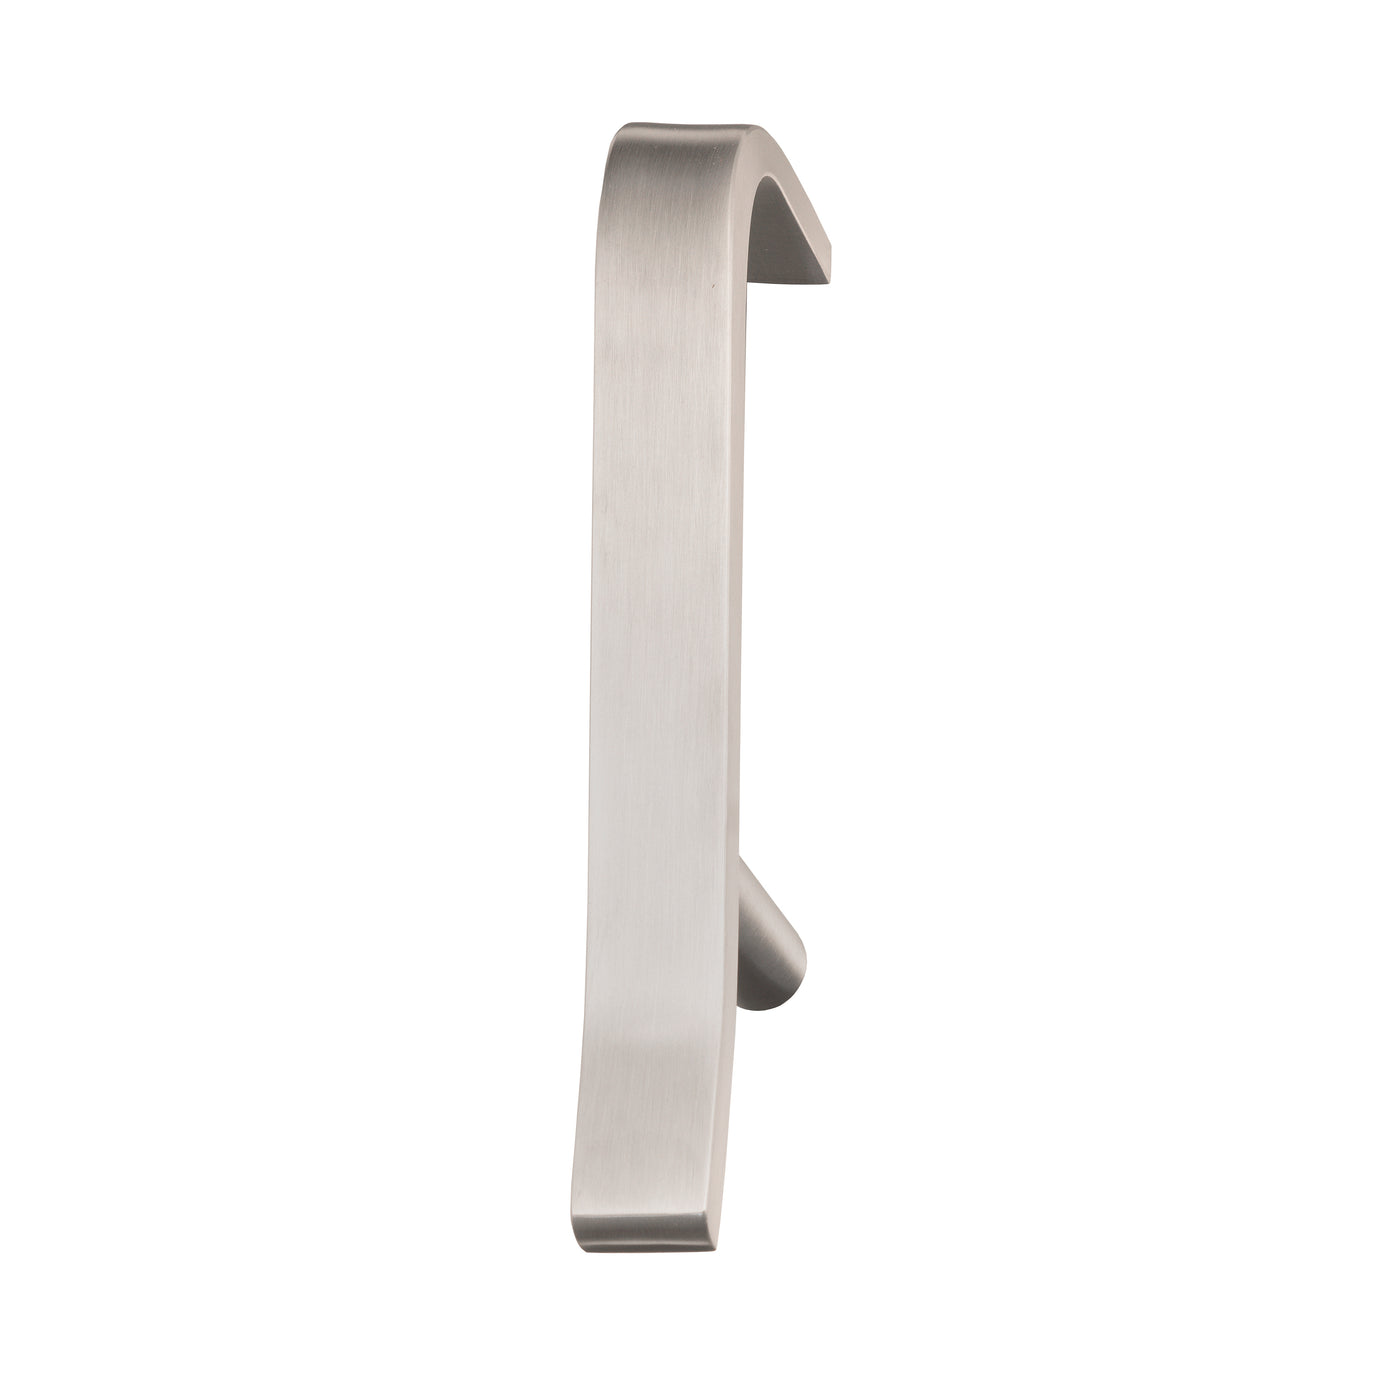 8 1/2 Inch Overall (5 1/4 Inch C-C) Classic Antimicrobial Door Pull Handle (Satin Stainless Steel Finish)